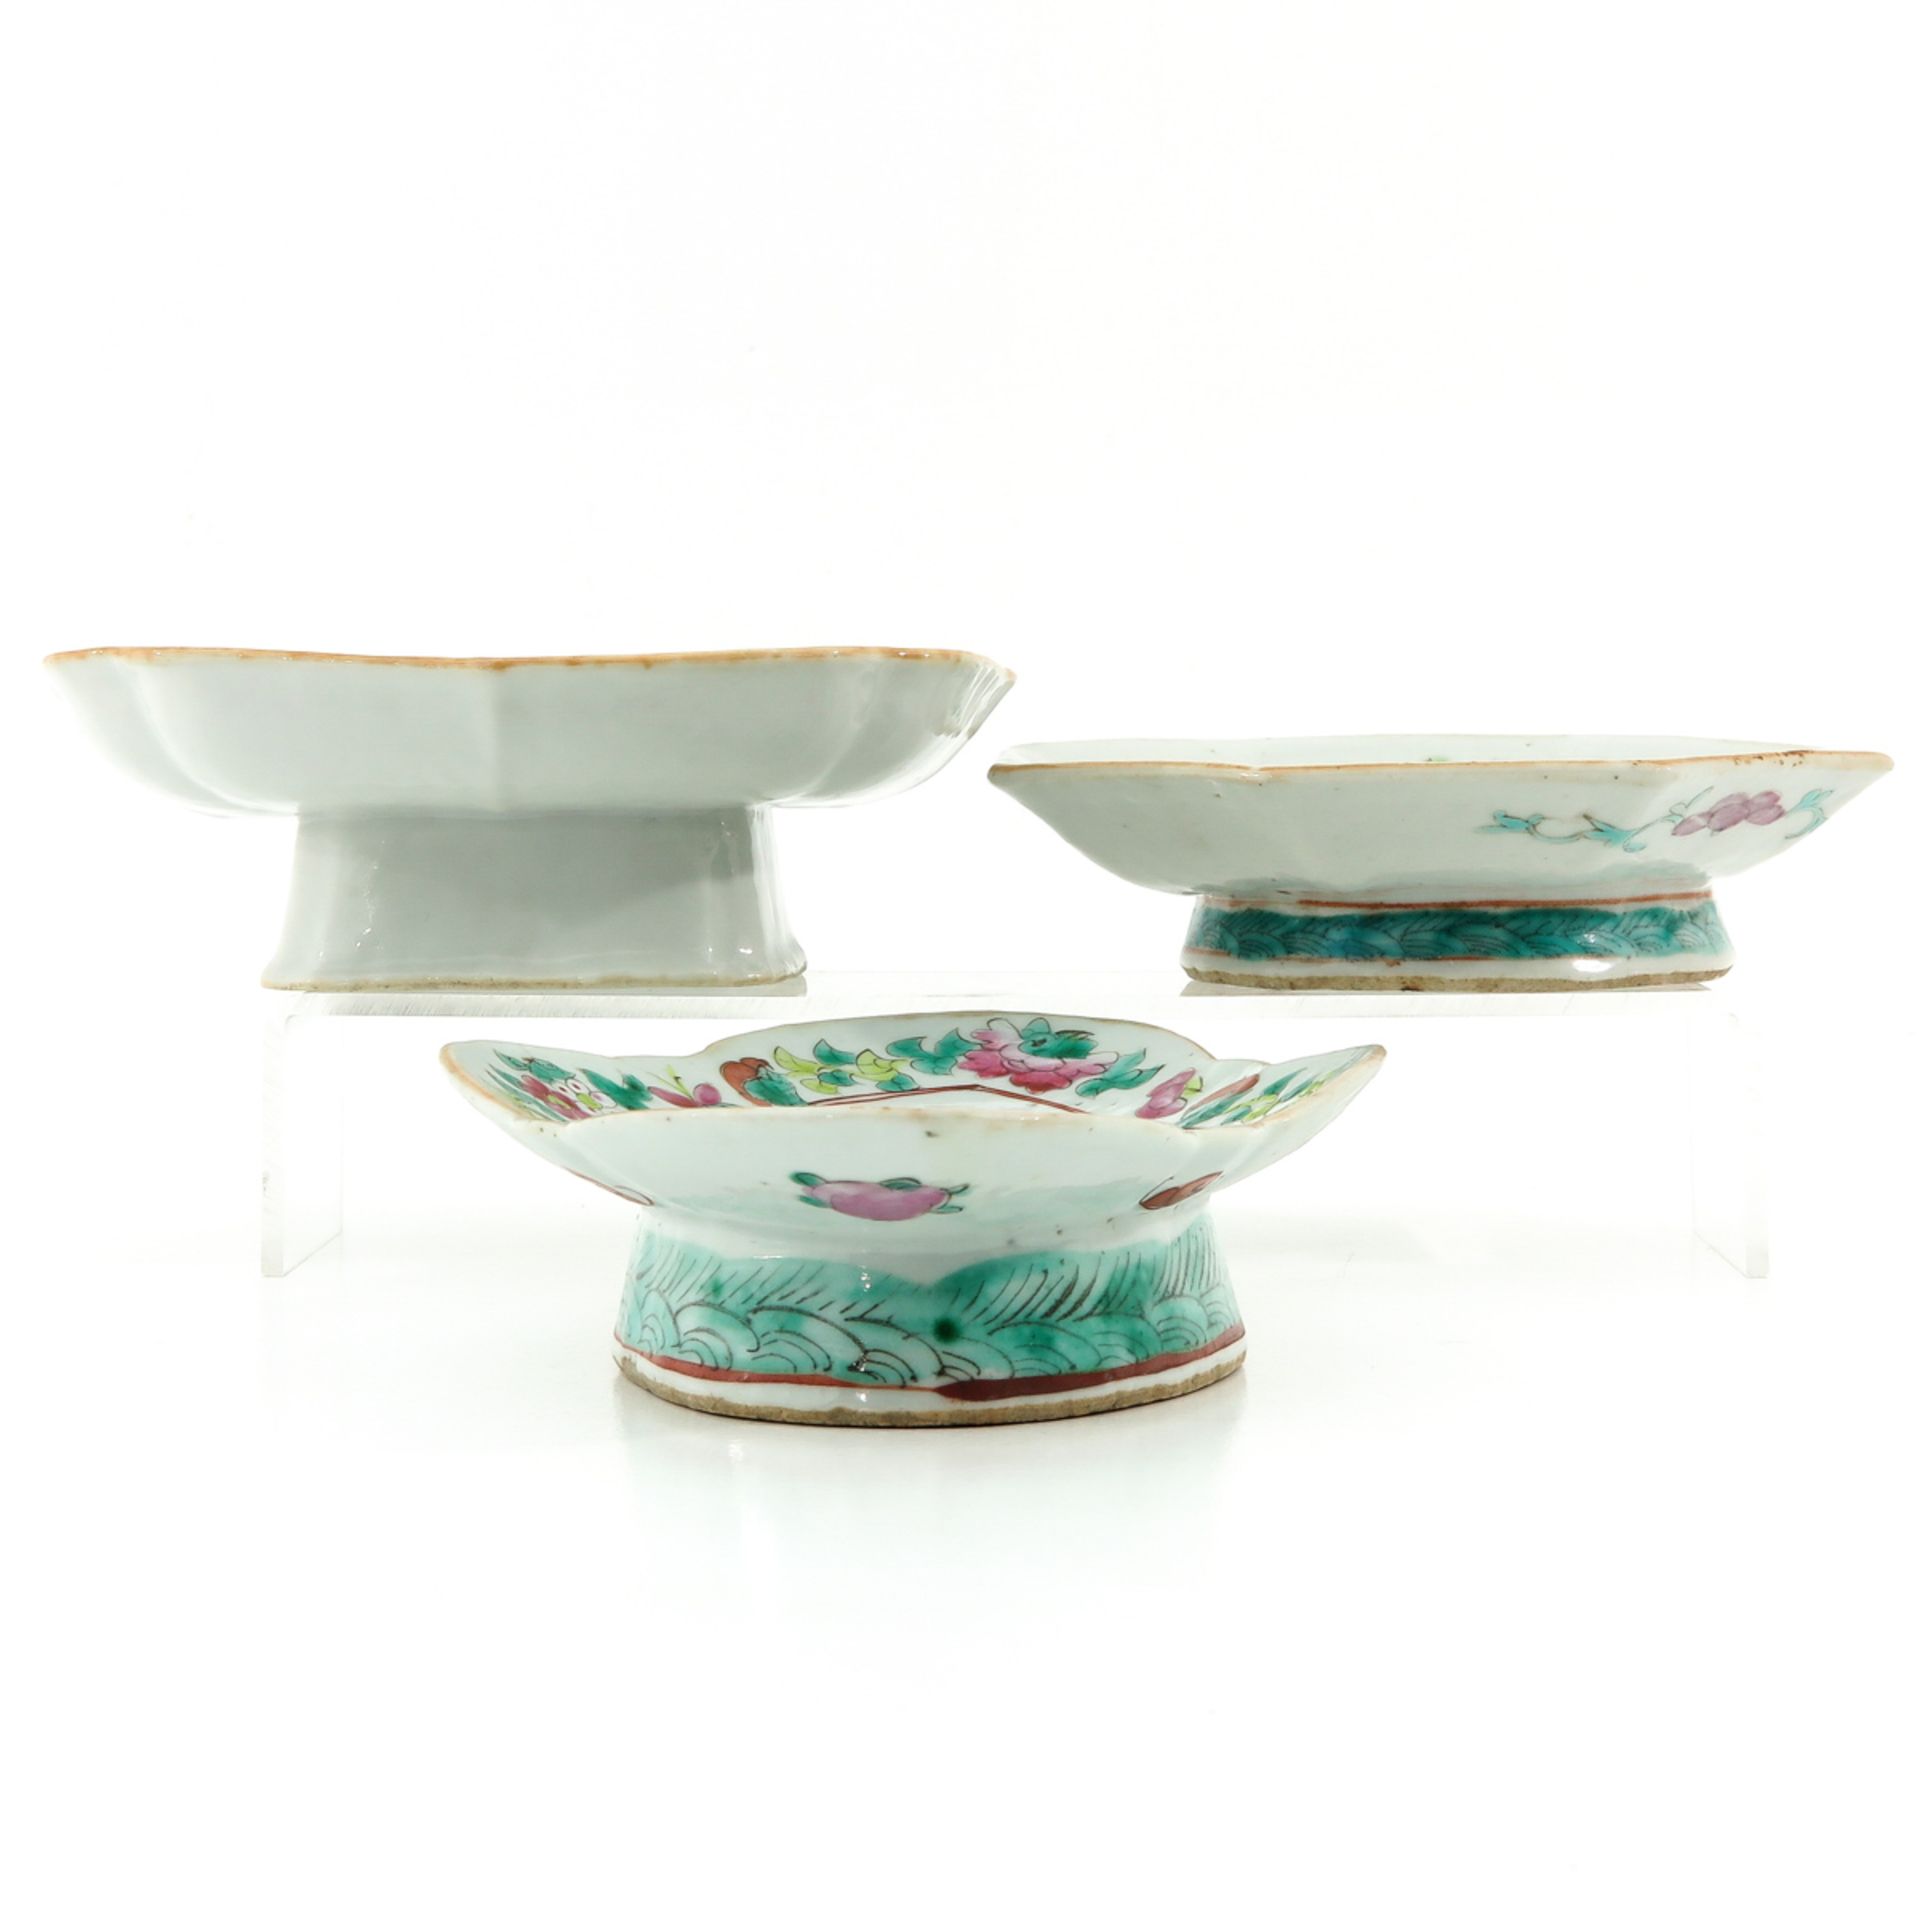 A Collection of 3 Altar Dishes - Image 4 of 10